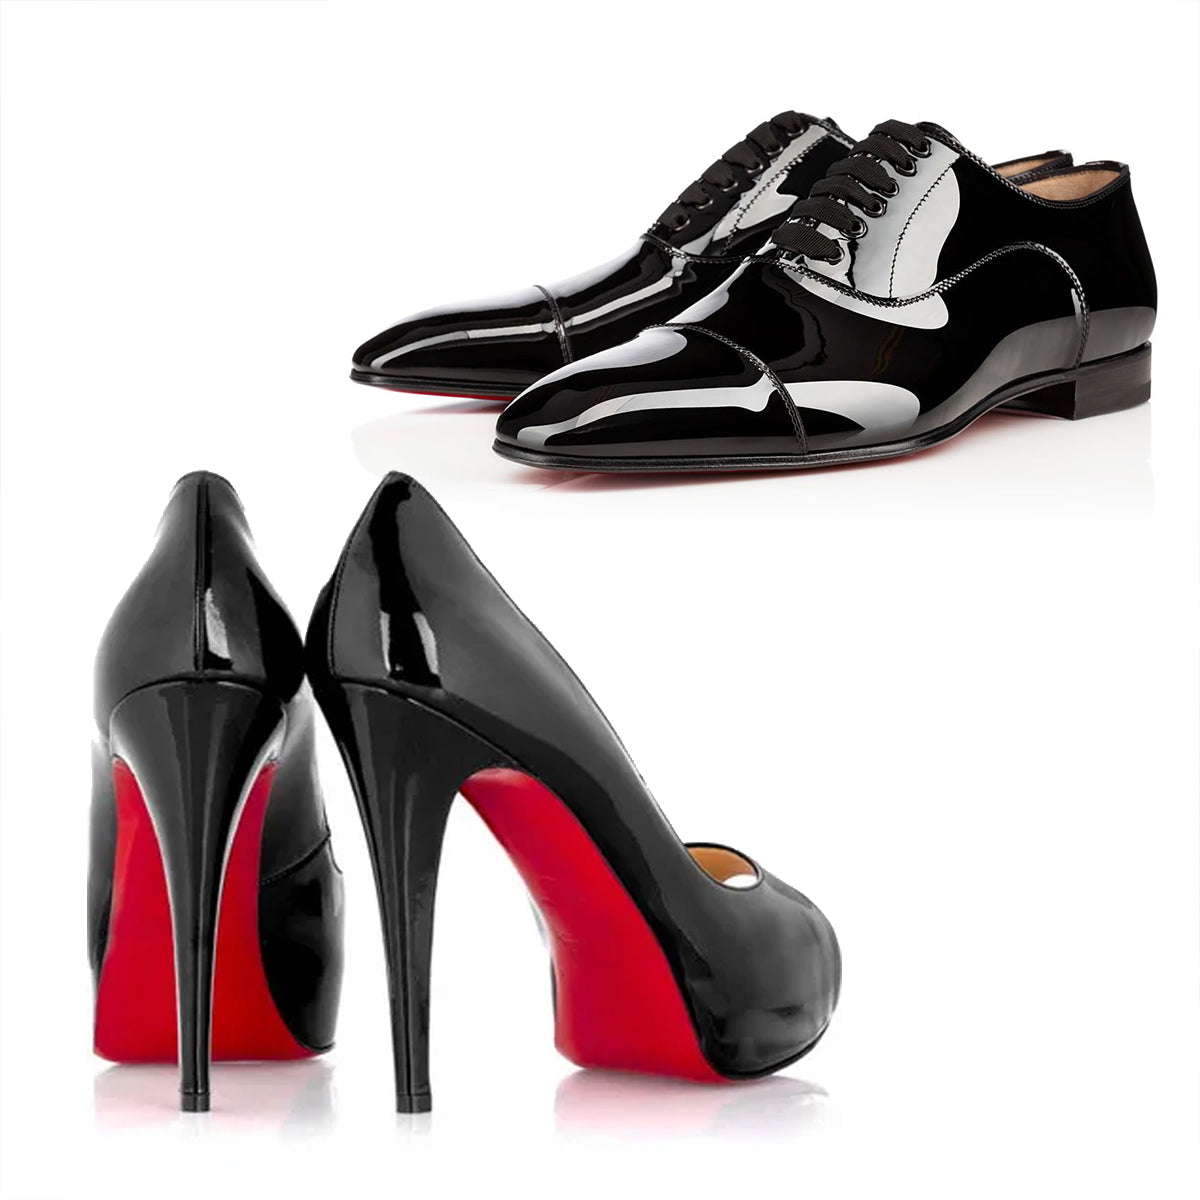 LOUBOUTIN SHOES / HEELS SERVICES &lt;br&gt; WITH RETURN SHIPPING &lt;br&gt; PRICE - £80+